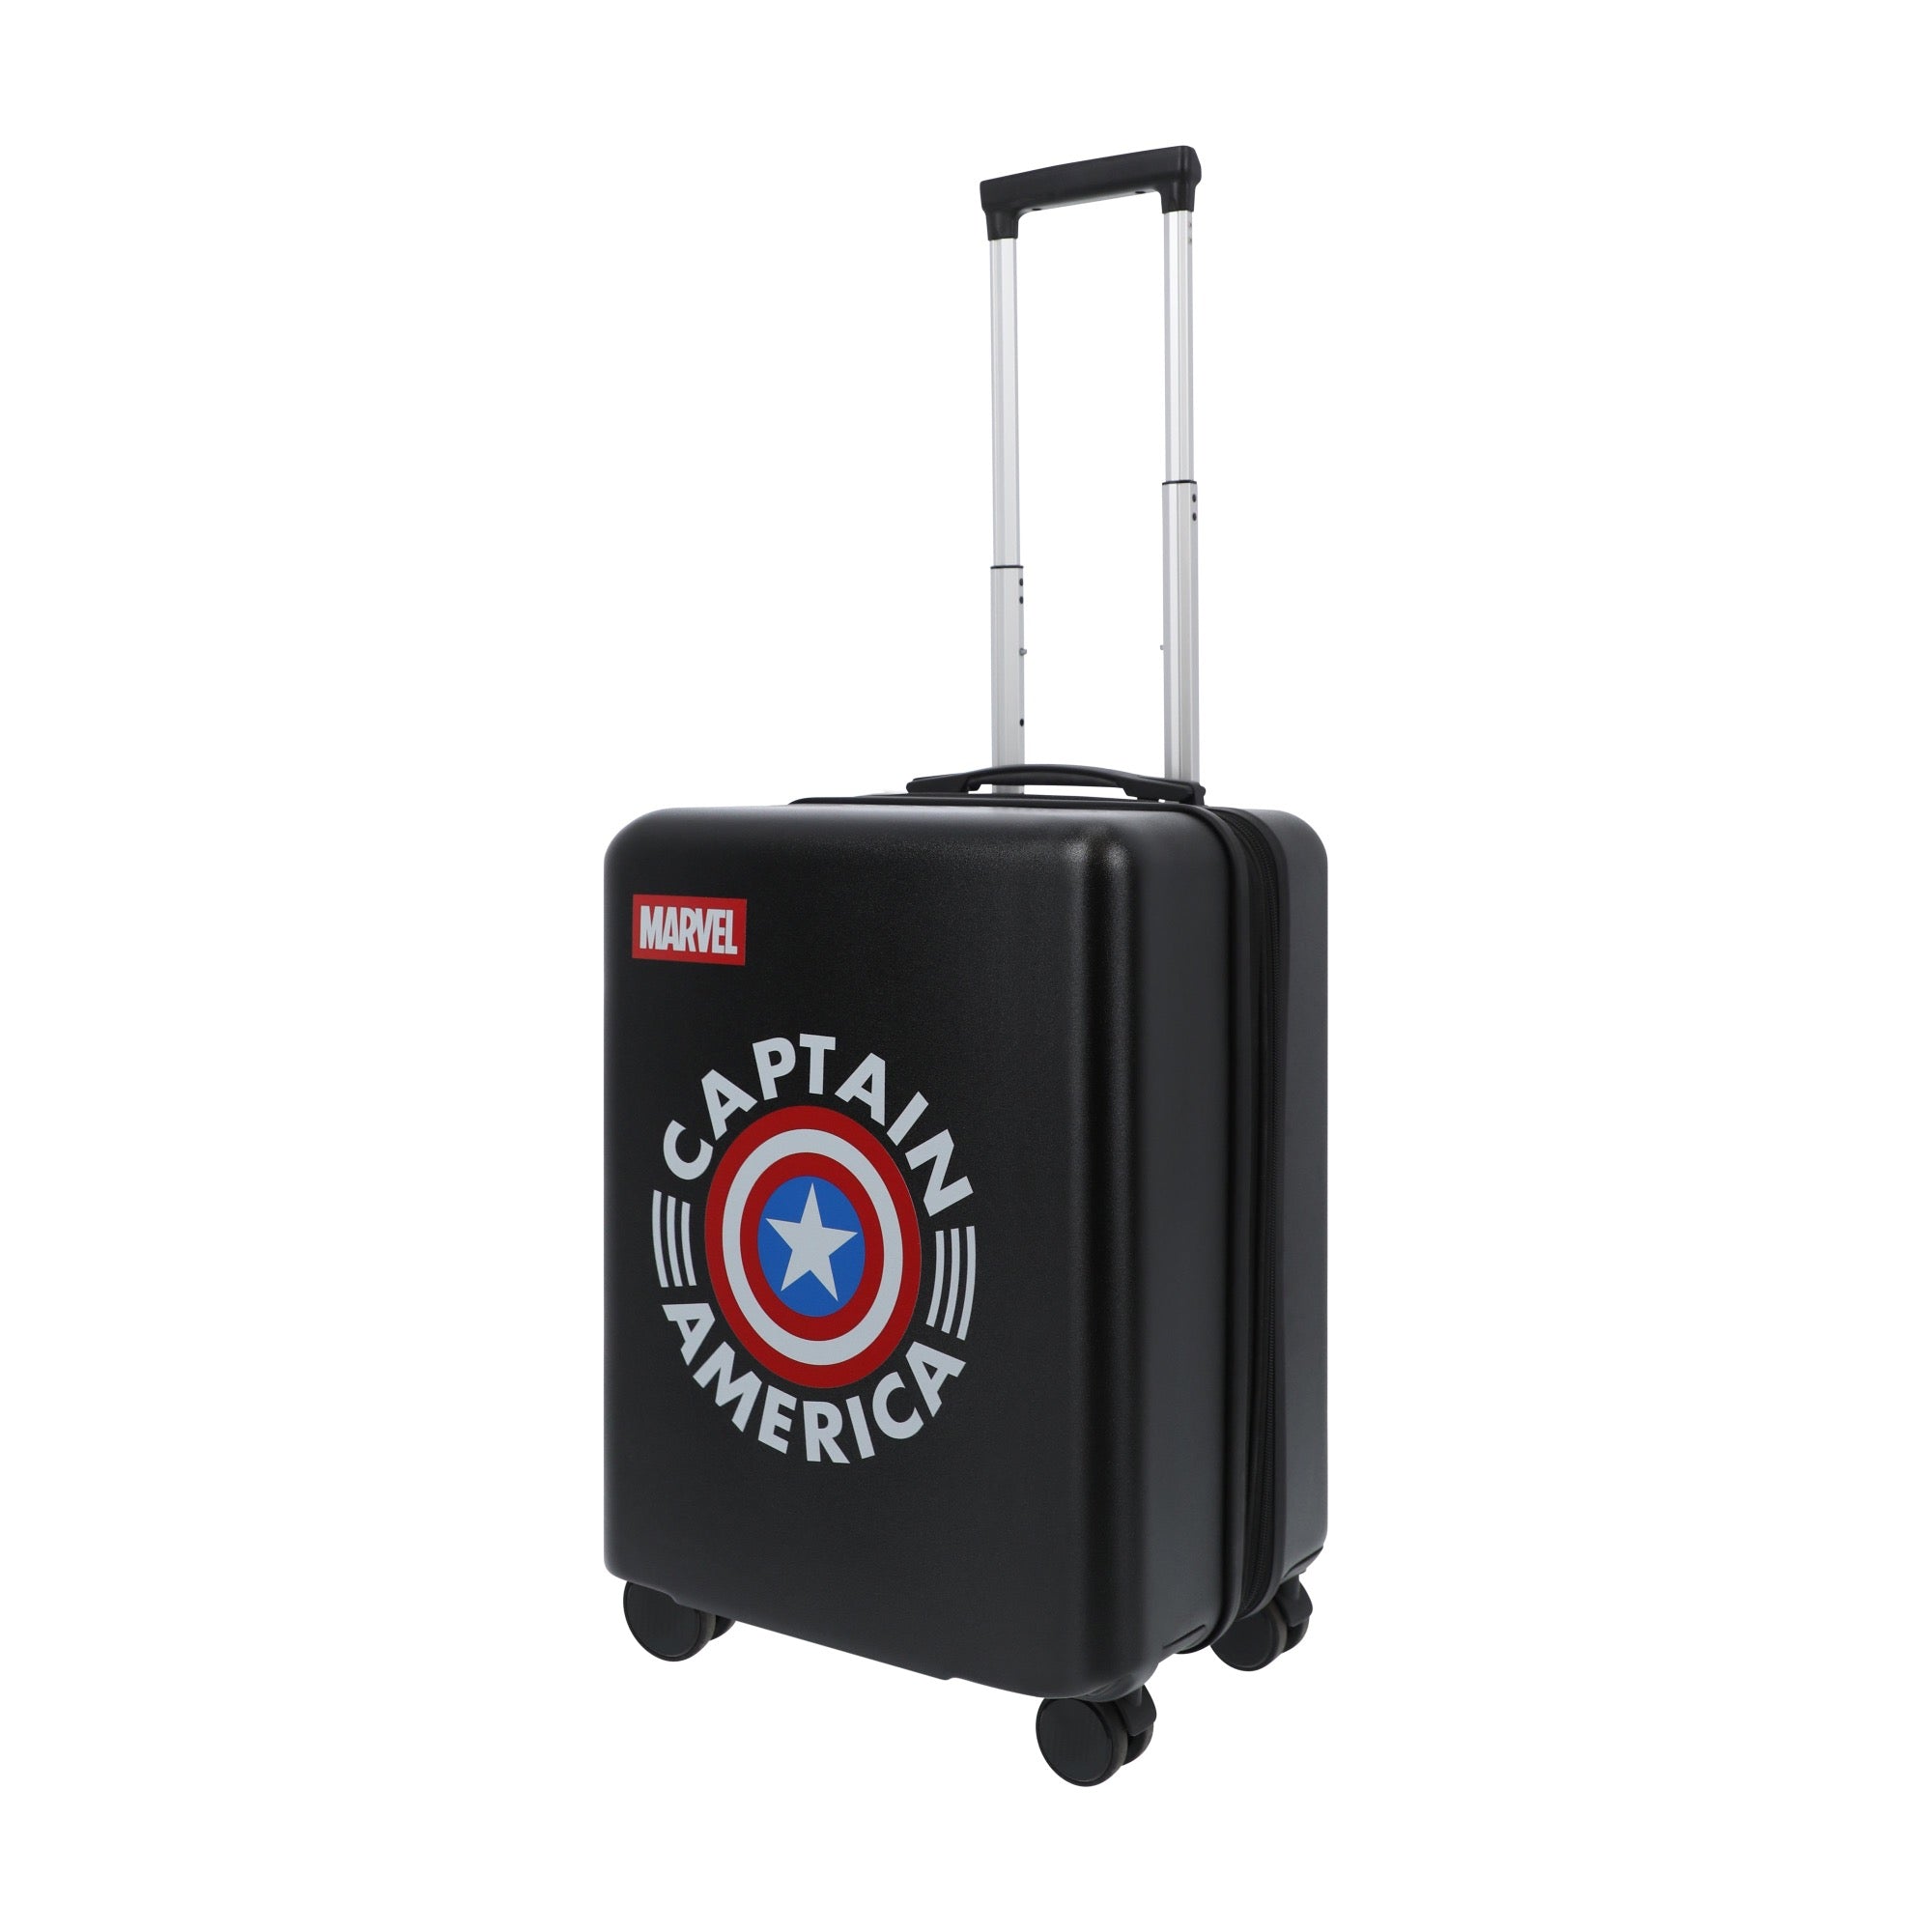 Black marvel captain america 22.5" carry-on spinner suitcase luggage by Ful